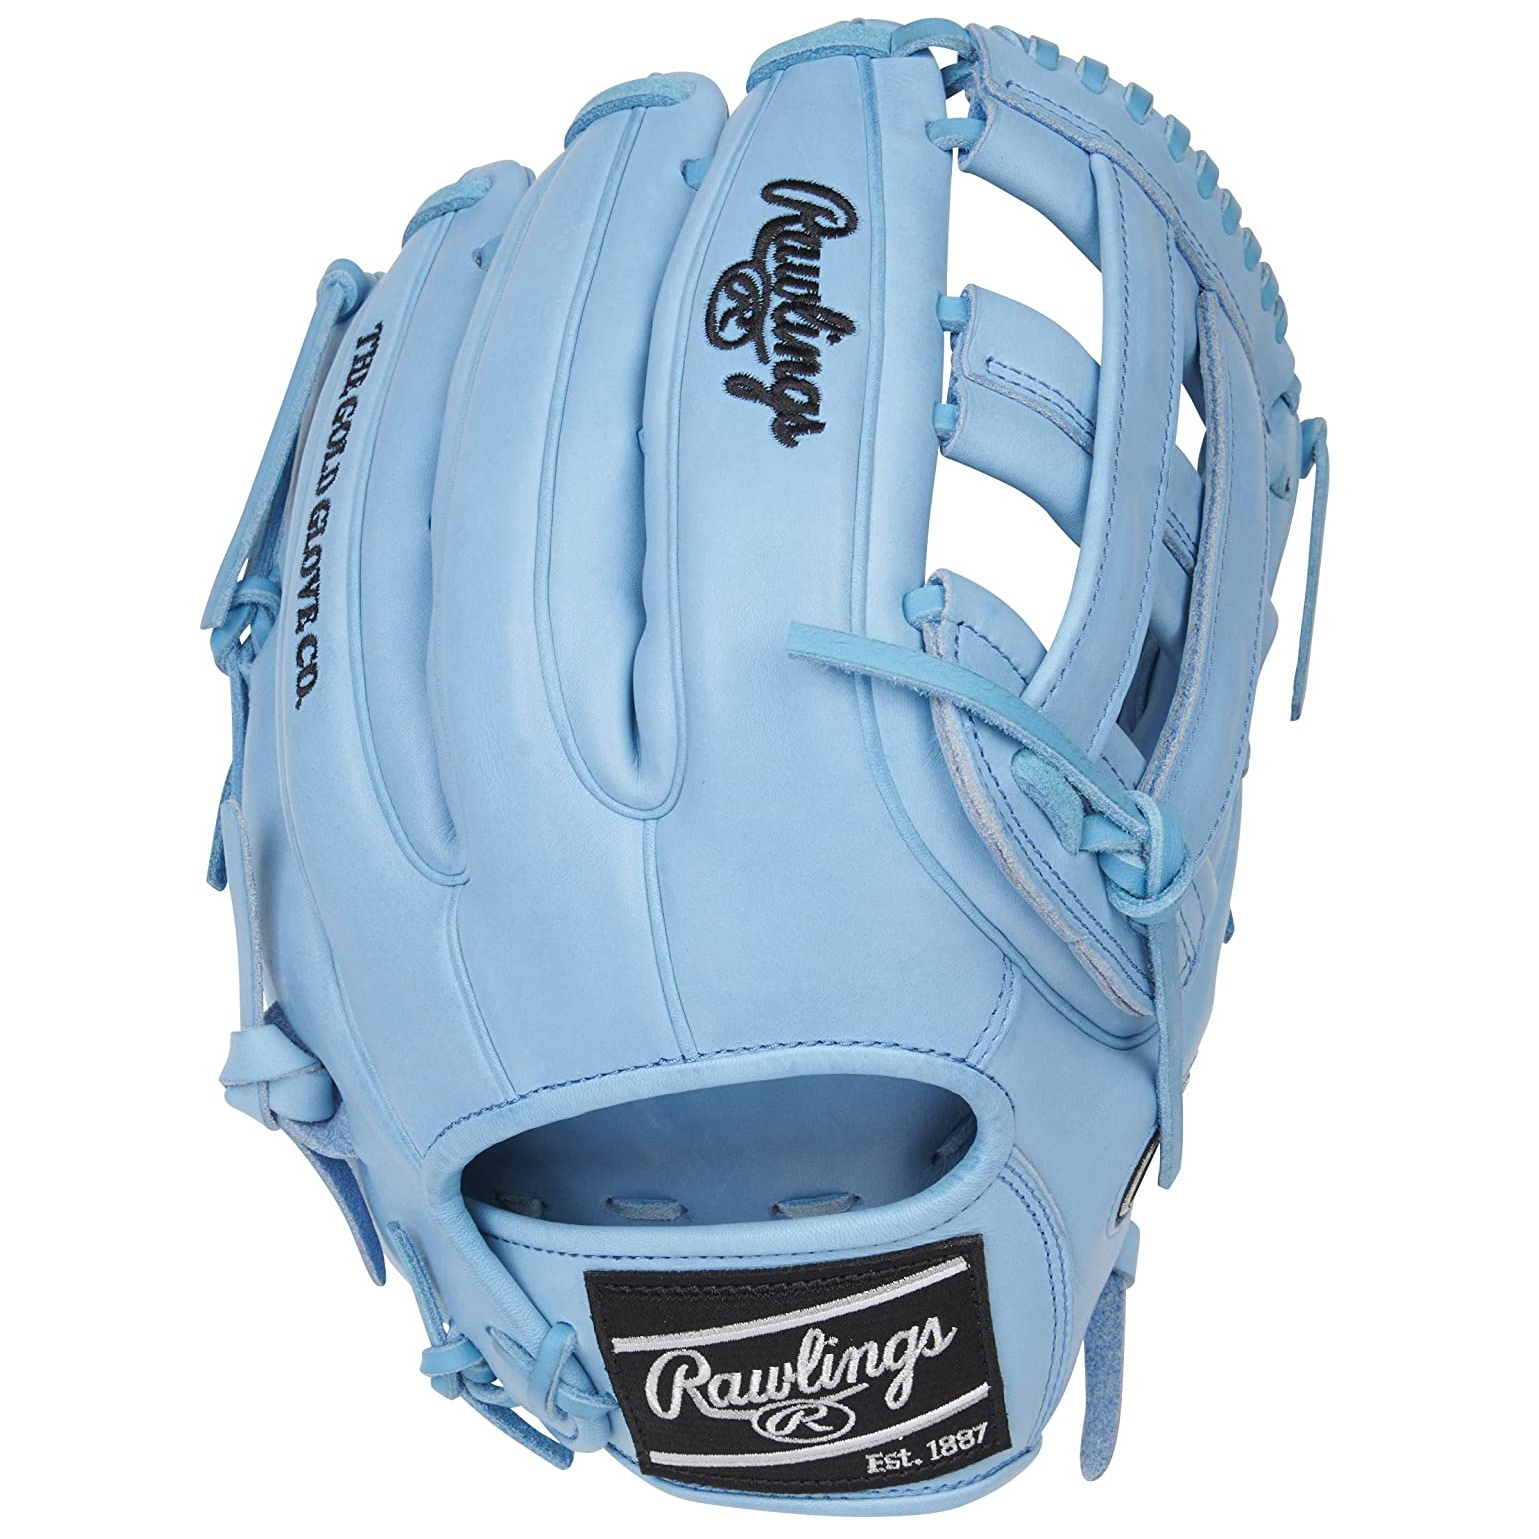 Get your hands on the ultimate baseball glove with Rawlings Heart of the Hide. Crafted from the finest steer leather, these gloves are taken from only the top 5% of all Rawlings hides, ensuring unbeatable structure and durability. With its narrow fit and 12.75 inch size, this Colombia Blue Heart of the Hide glove features a Pro H Web and is designed for the pro player in you. Don't settle for less, upgrade your game with the Heart of the Hide.  Colombia Blue Narrow Fit Pro H Web 12.75 Inch 